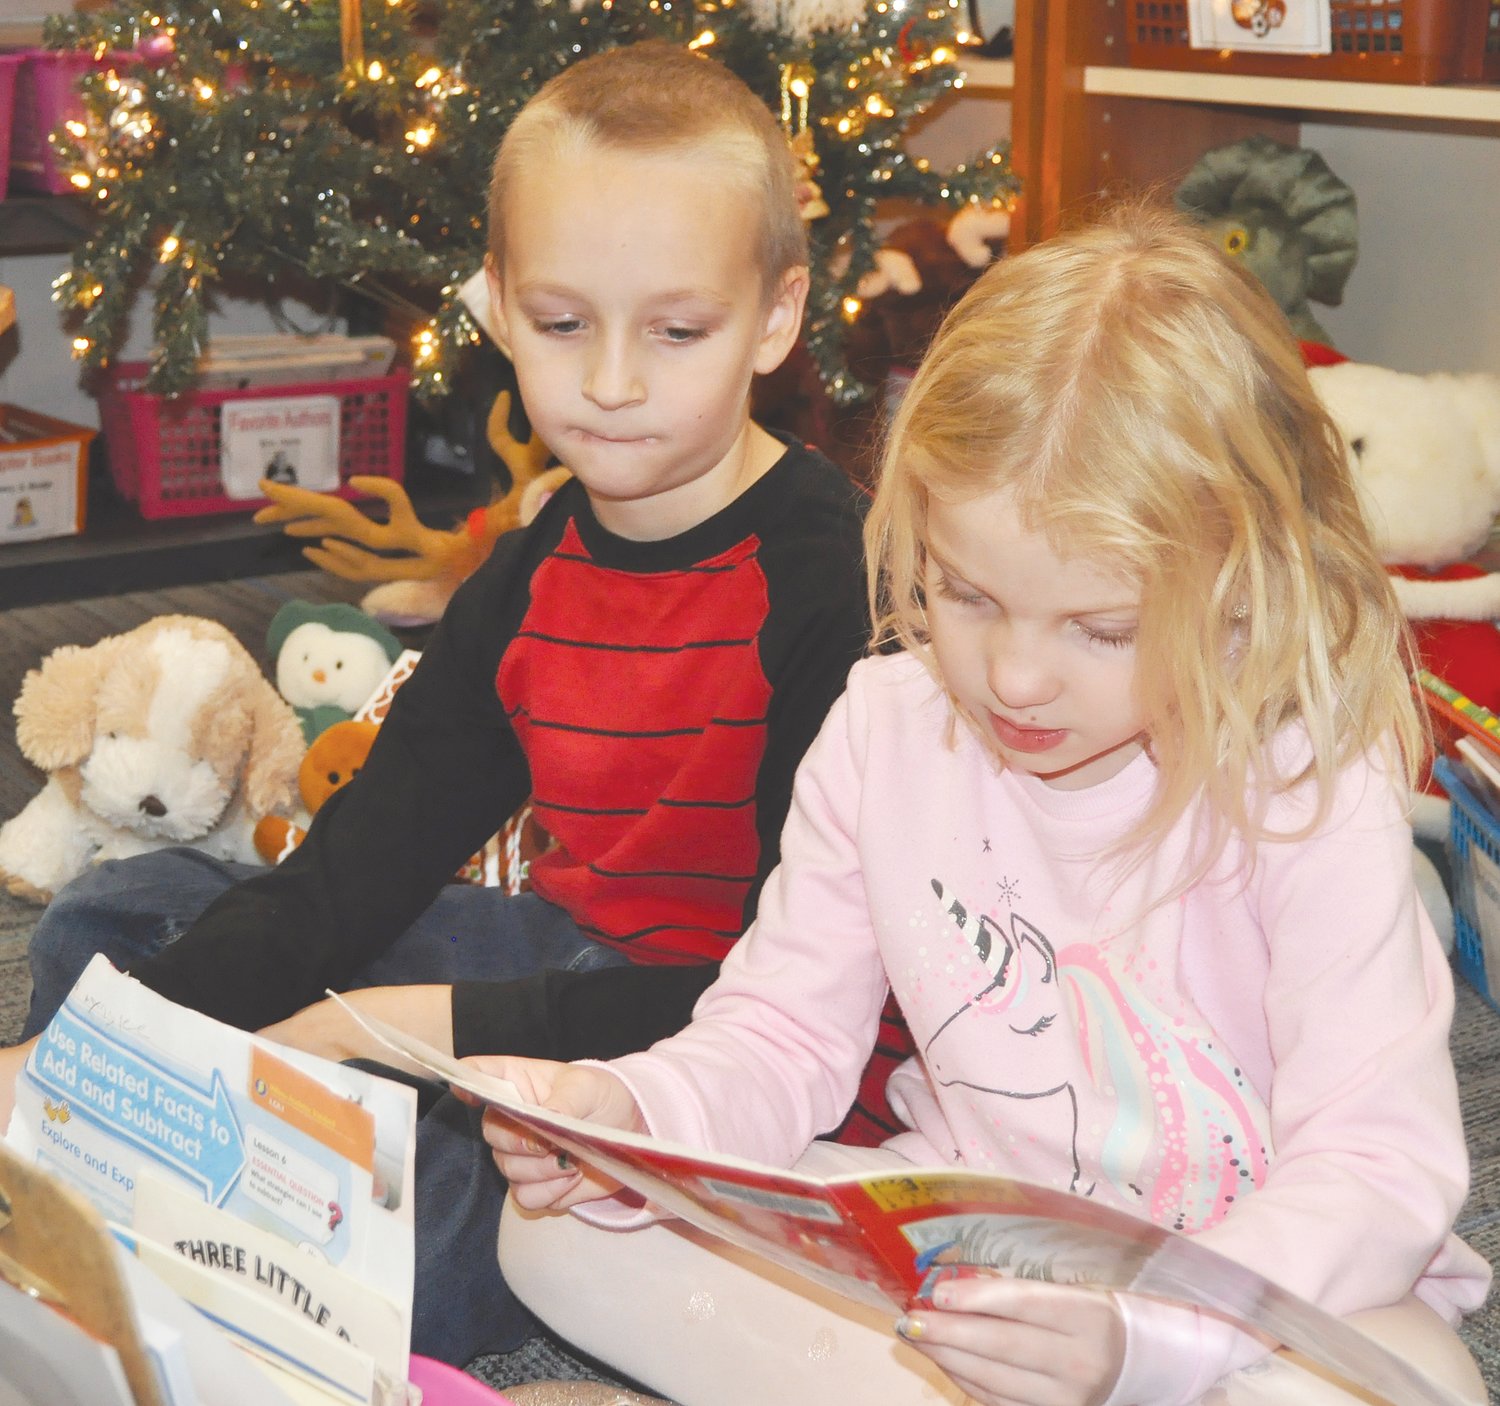 Jackson Kelso, left, and Aynslee Campbell read together during class.